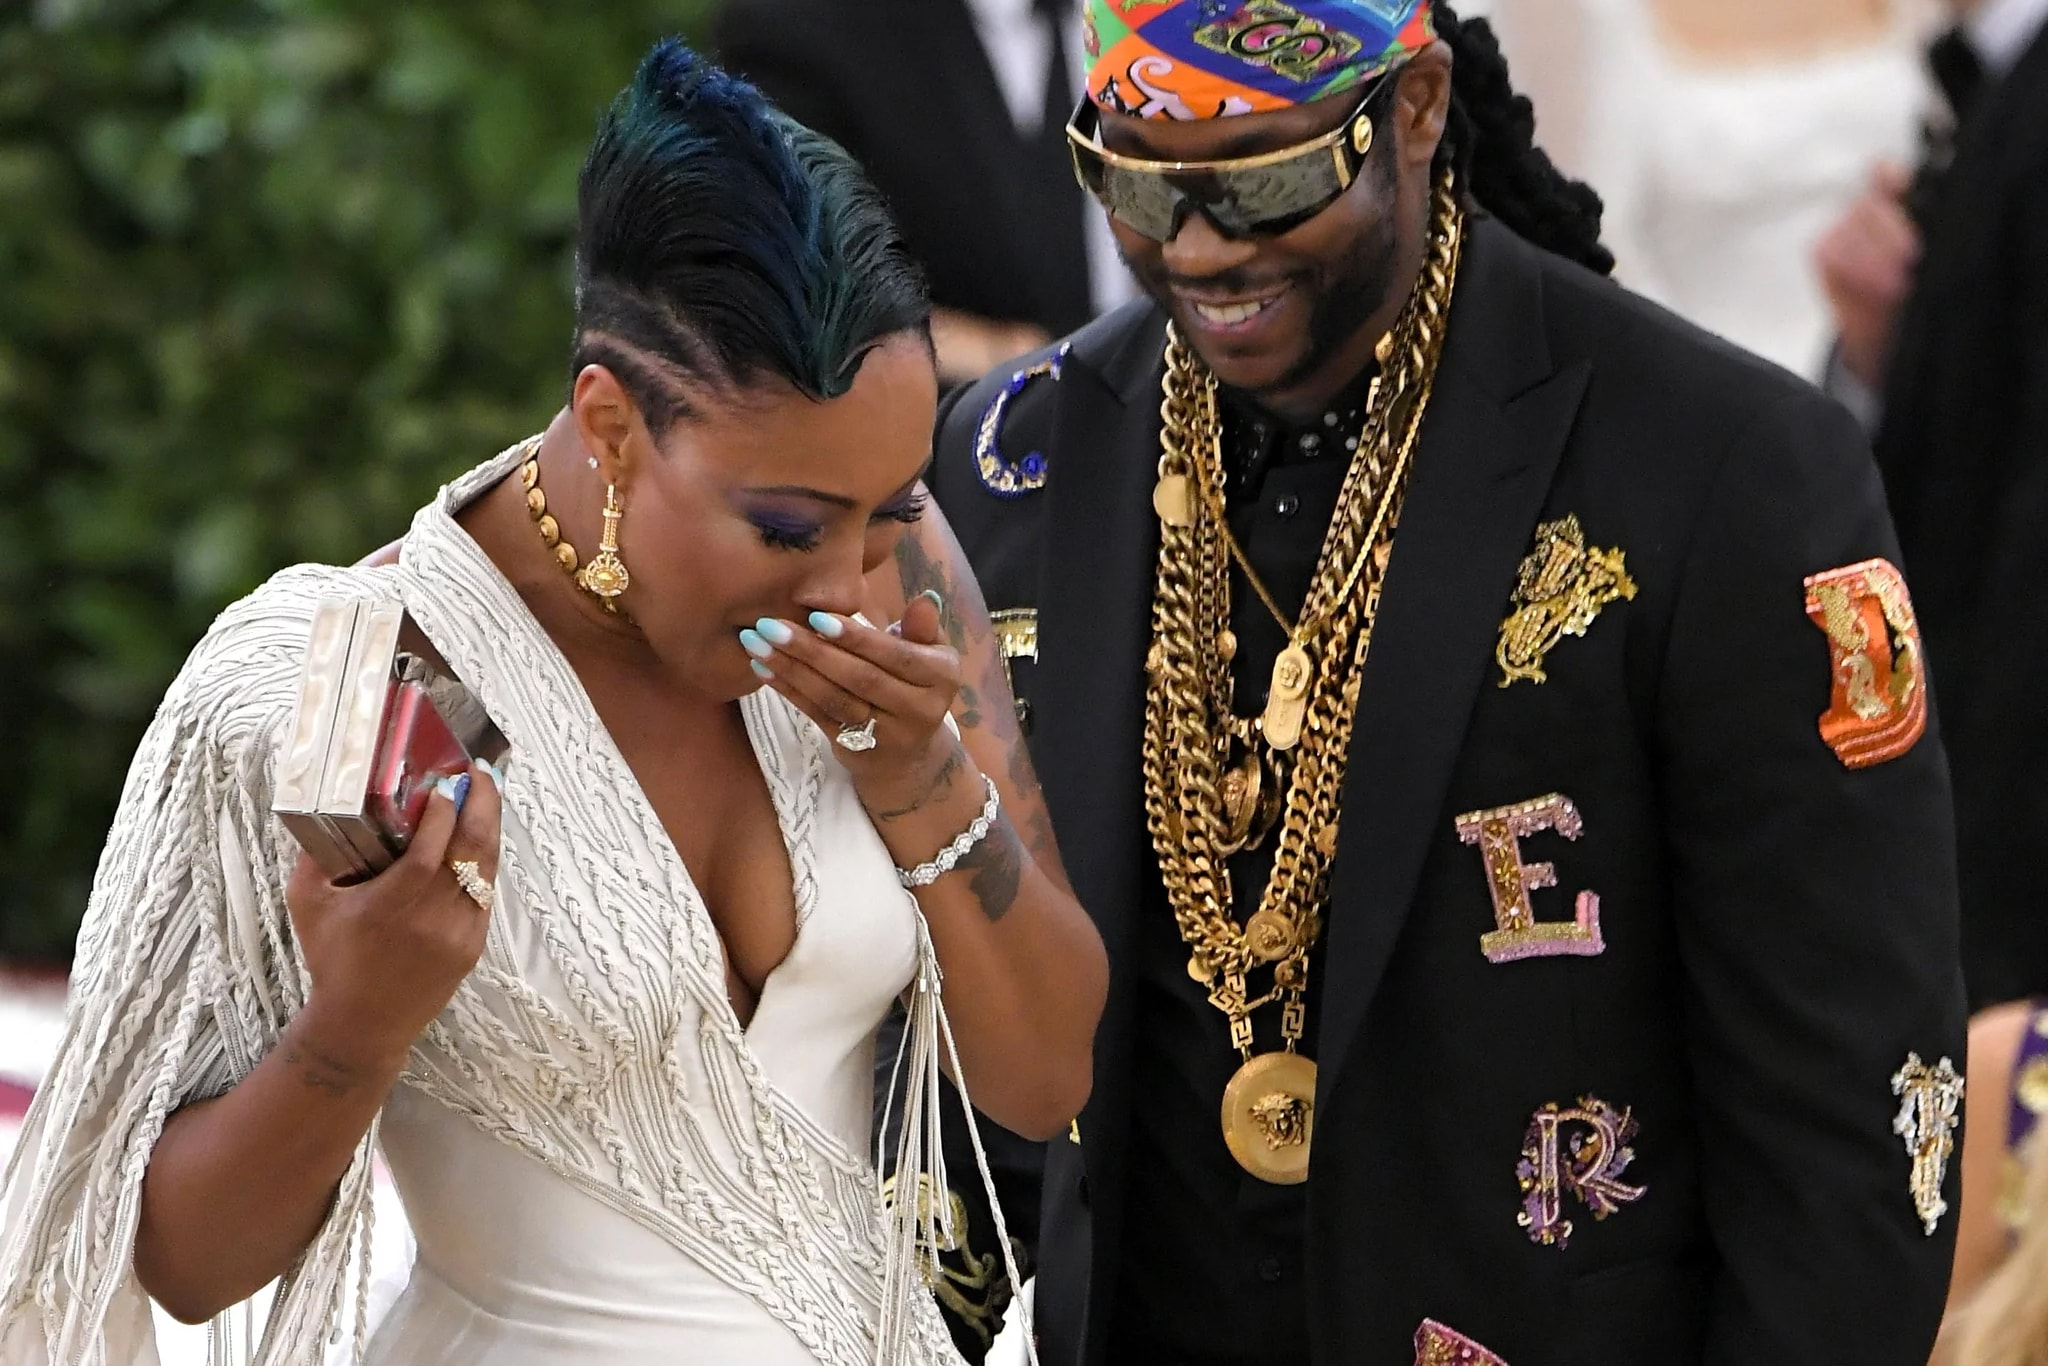 2 Chainz Nakesha Ward Met Gala 2018 Elon Musk Grimes Red Carpet Proposal Watch Stream Best Dressed Outfits Guests Attendees Theme Attire Dresses